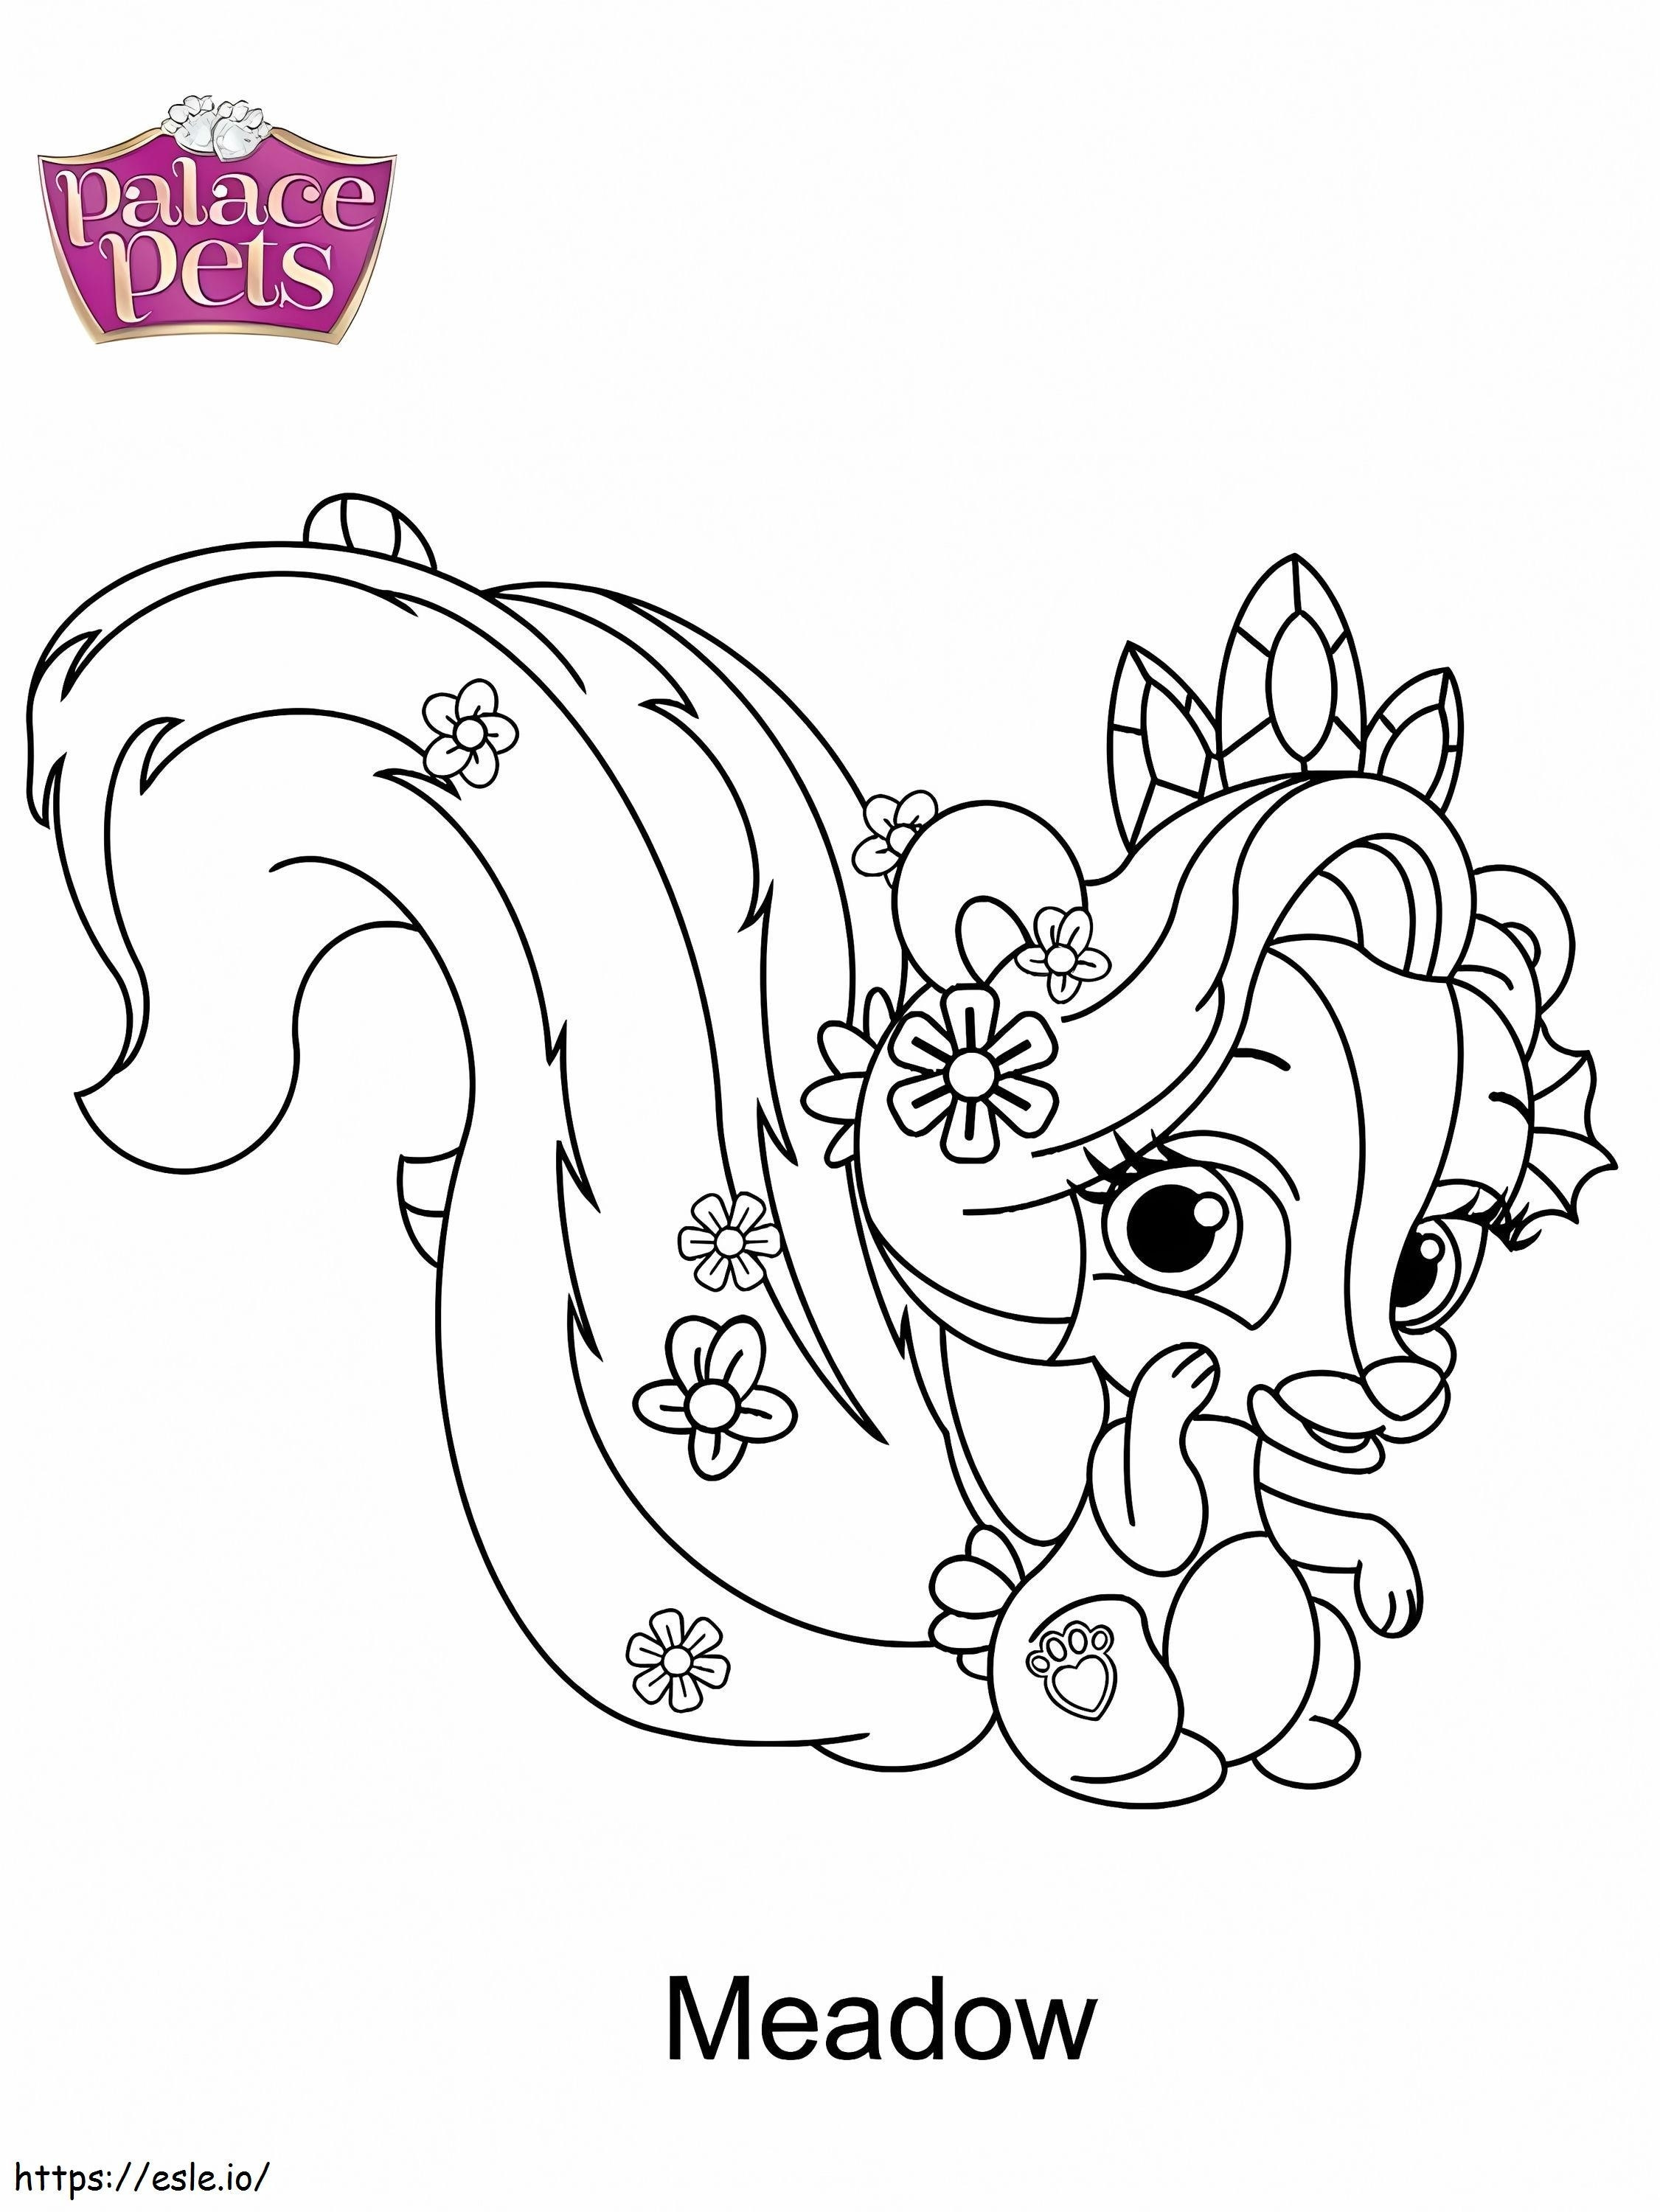 1587086990 Palace Pets Meadow coloring page